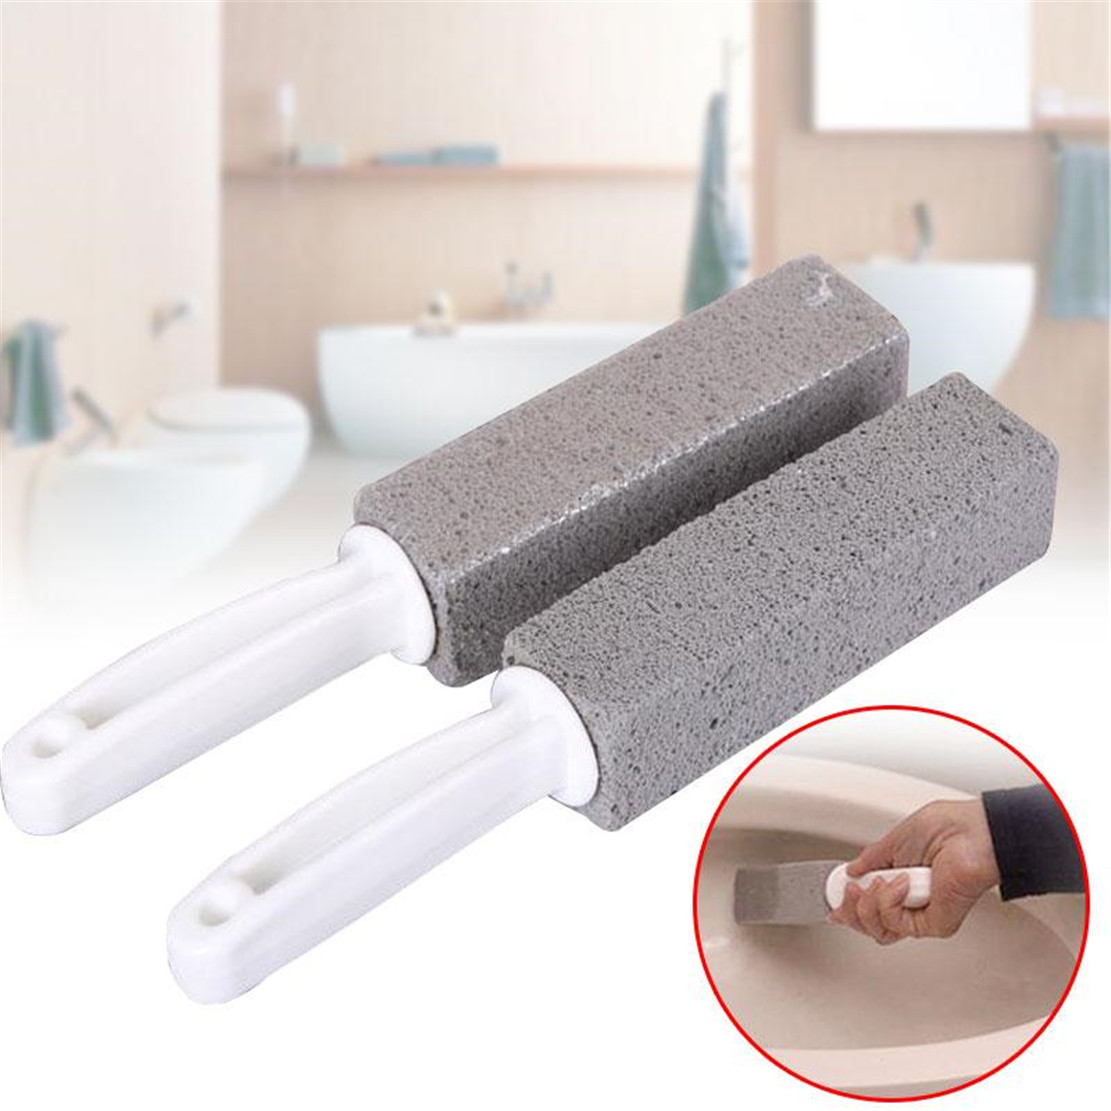 High Quality Kitchen Pumice Cleaning Stone with Handle